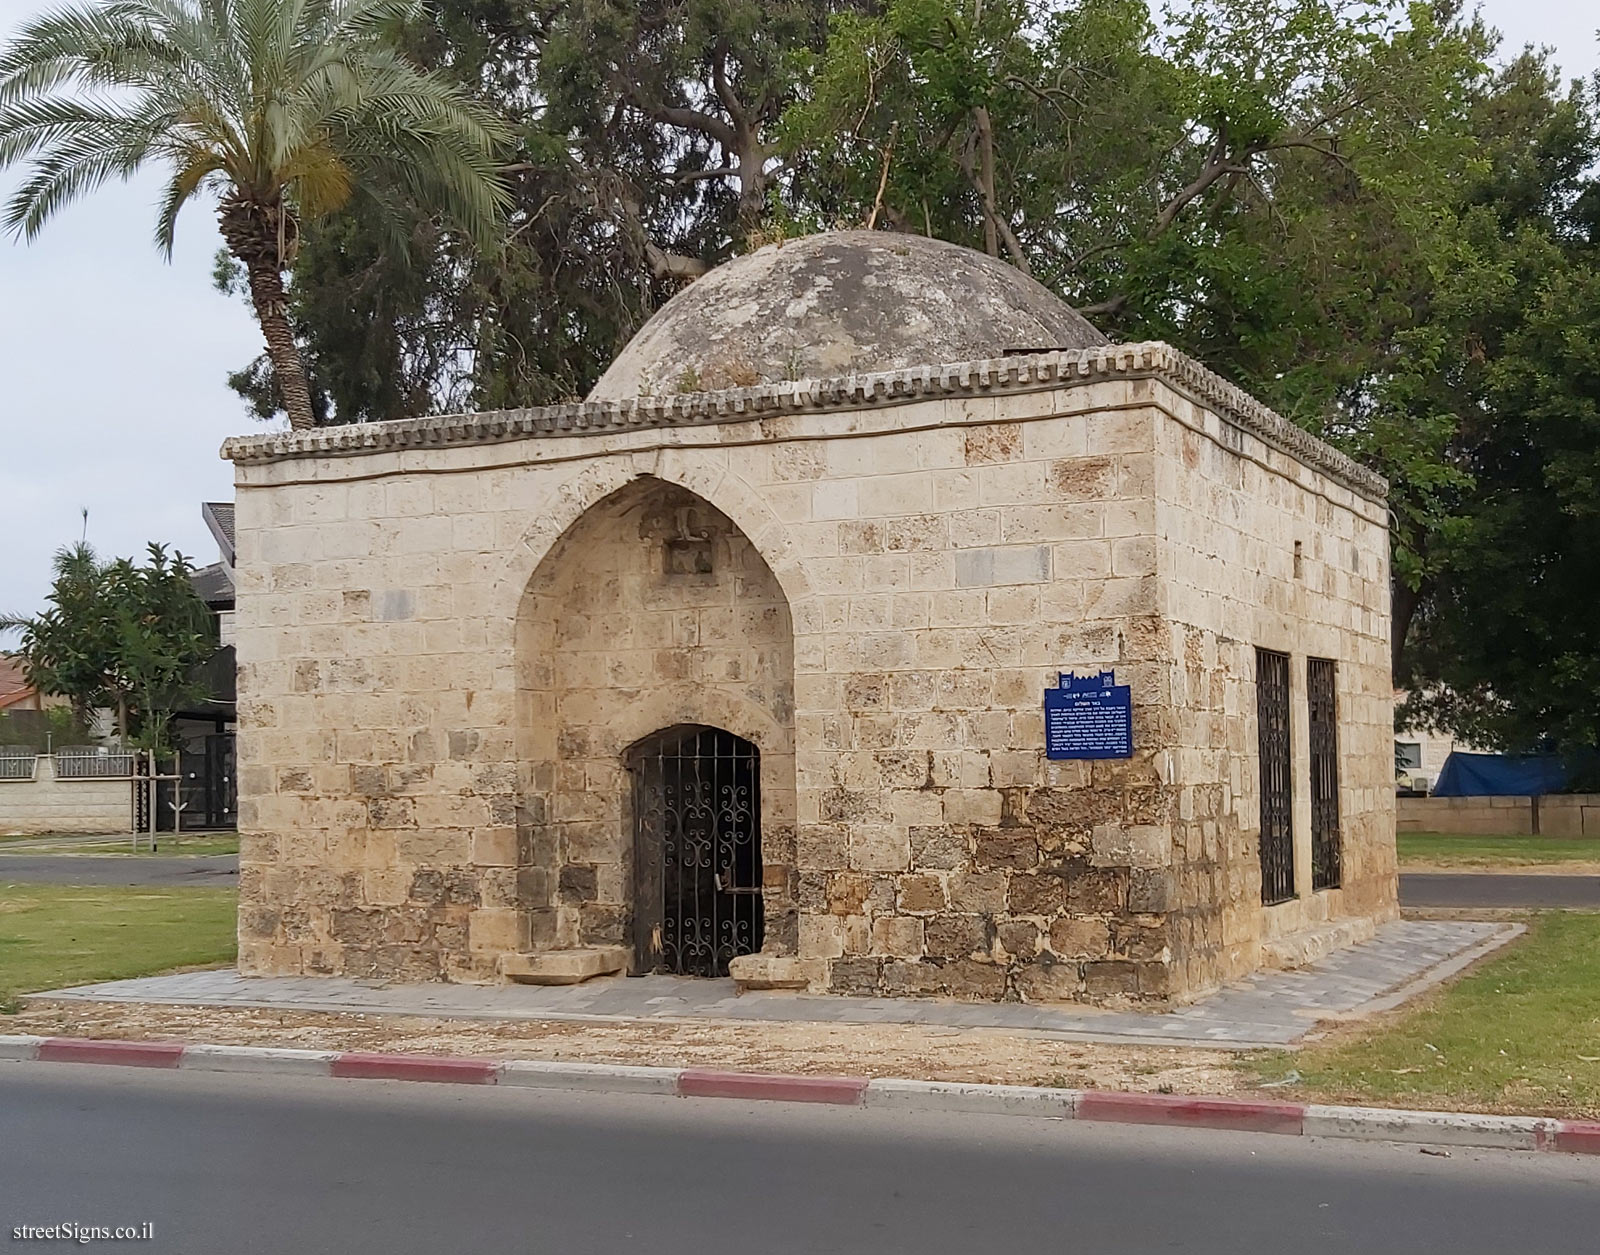 Heritage Sites in Israel - The well of peace - Yerushalayim Ave, Lod, Israel